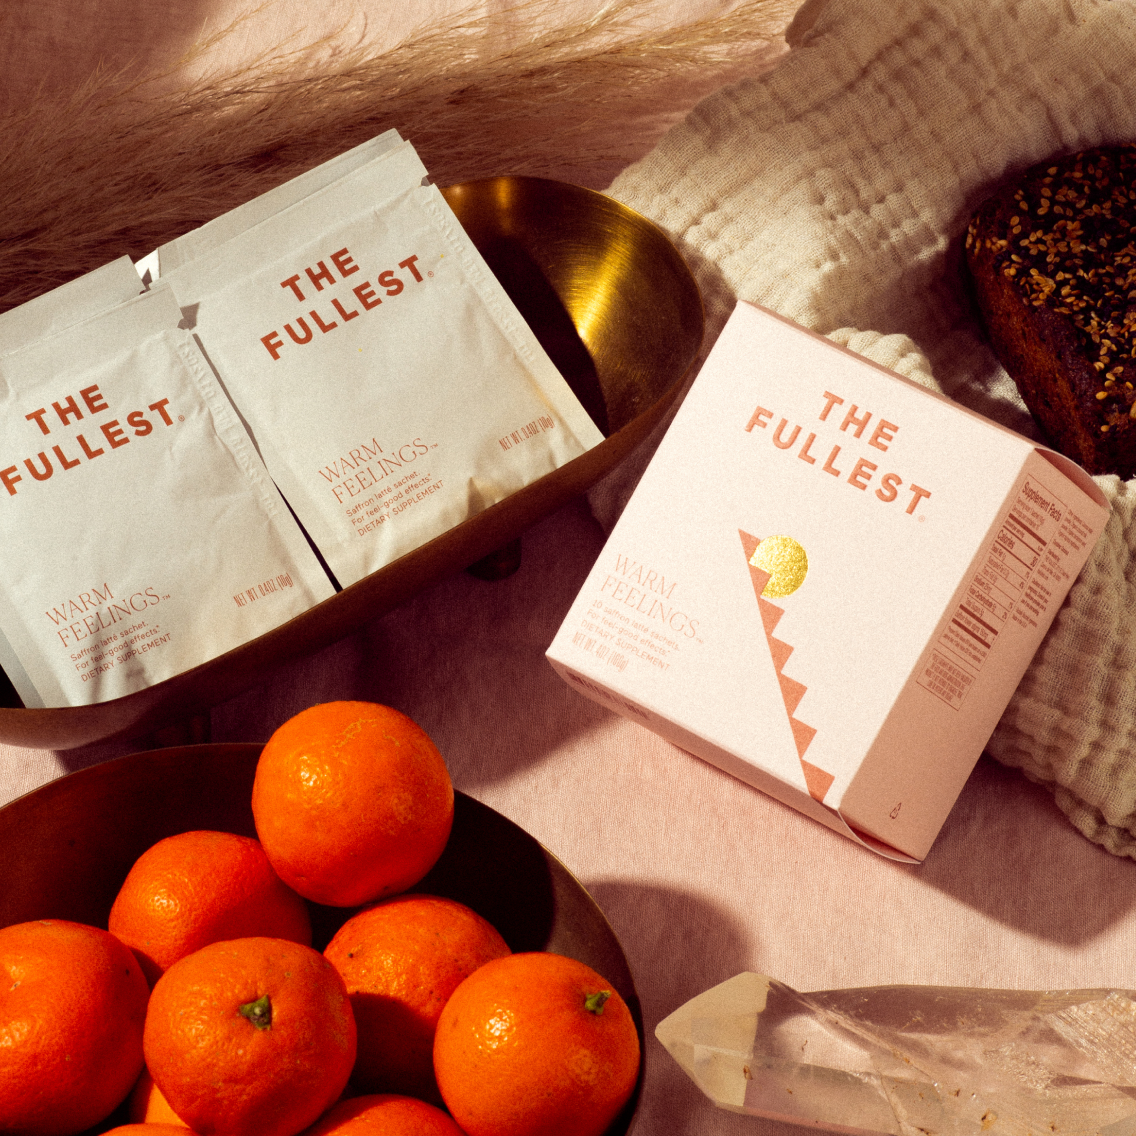 Package of "Warm Feelings Sachet" dietary supplement by THE FULLEST now available in a saffron latte flavor, with an abstract design, sharing its health-conscious features such as non-gmo, gluten-free.